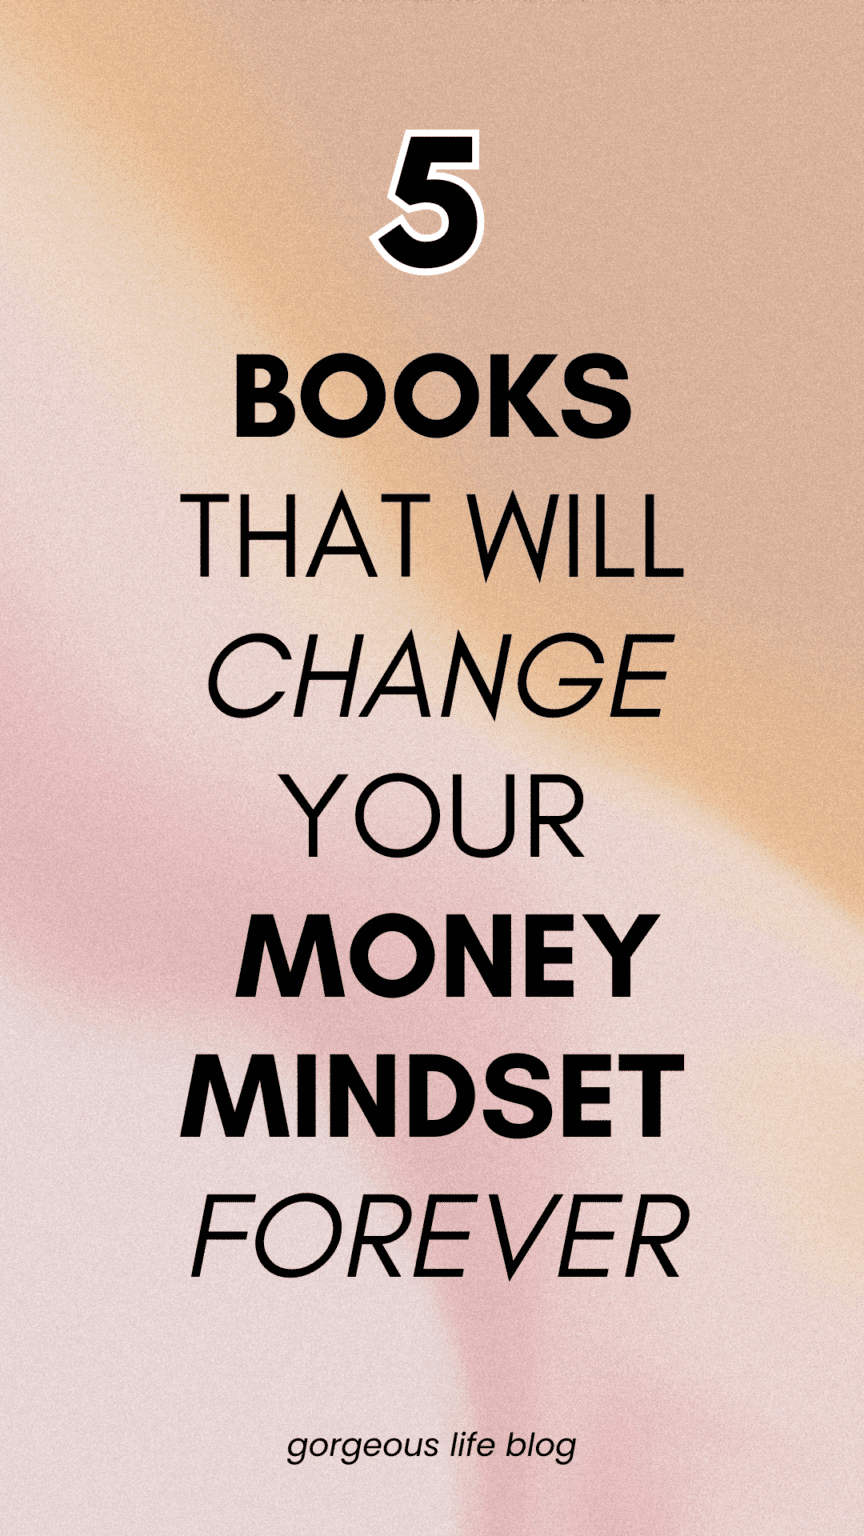 Books that will change your money mindset forever - Gorgeous Life Blog